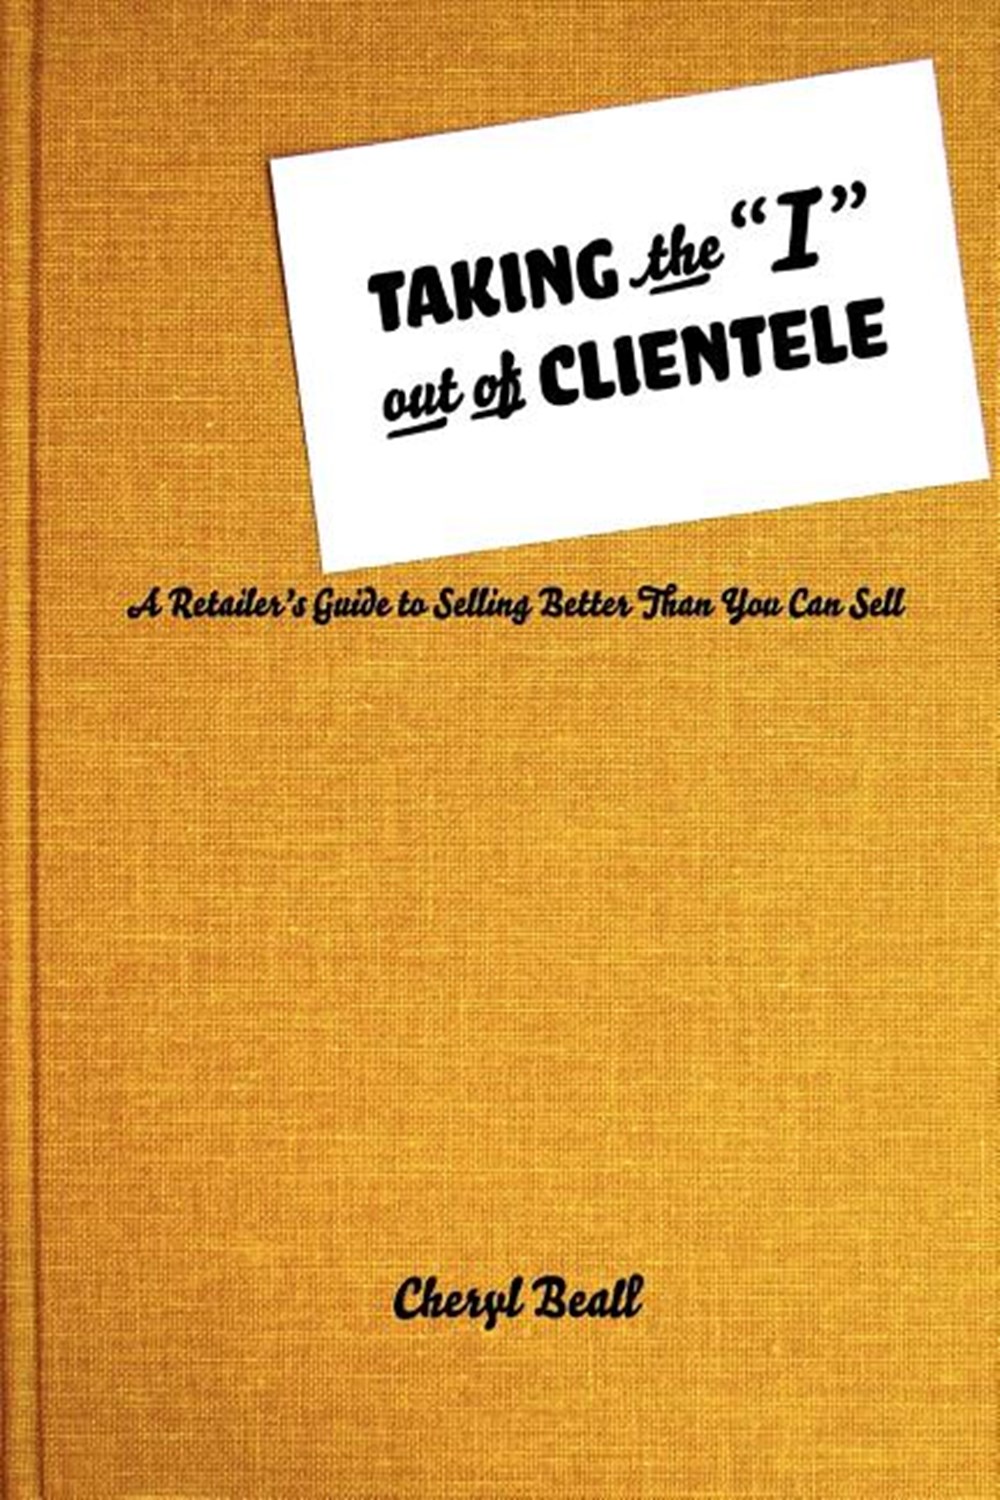 Taking the I Out of Clientele: A Retailer's Guide to Selling Better Than You Can Sell